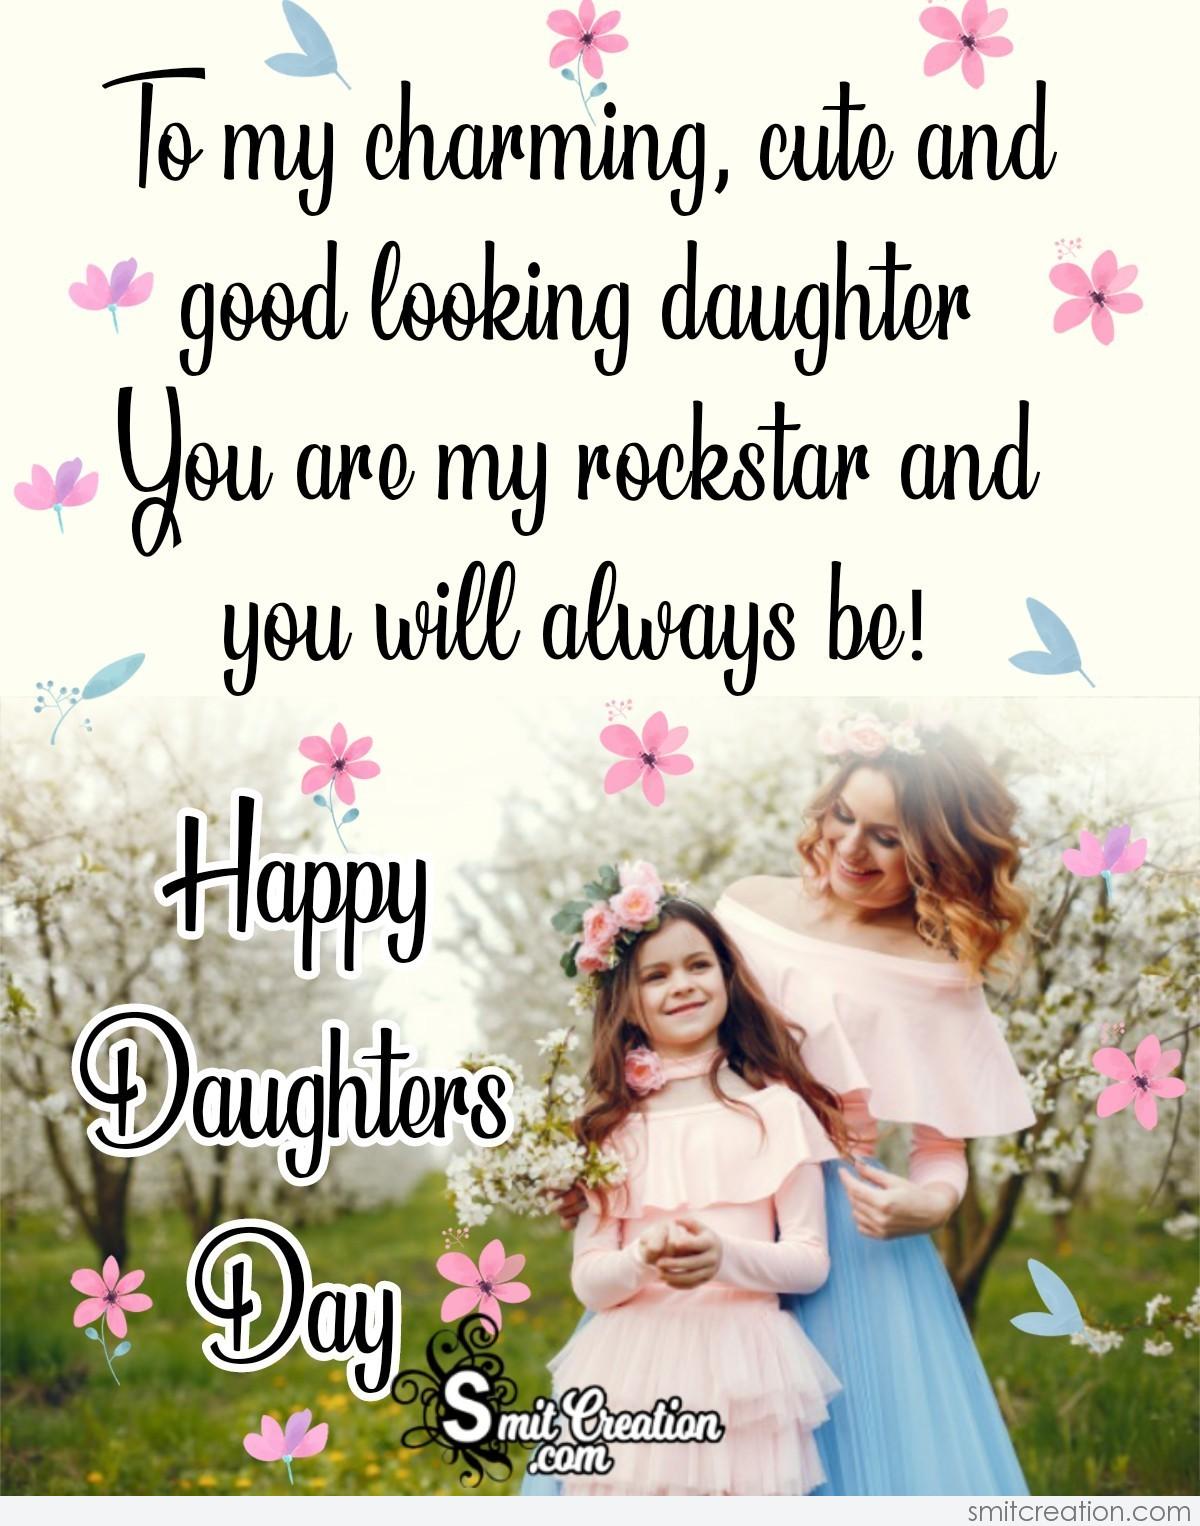 National Daughters Day Image